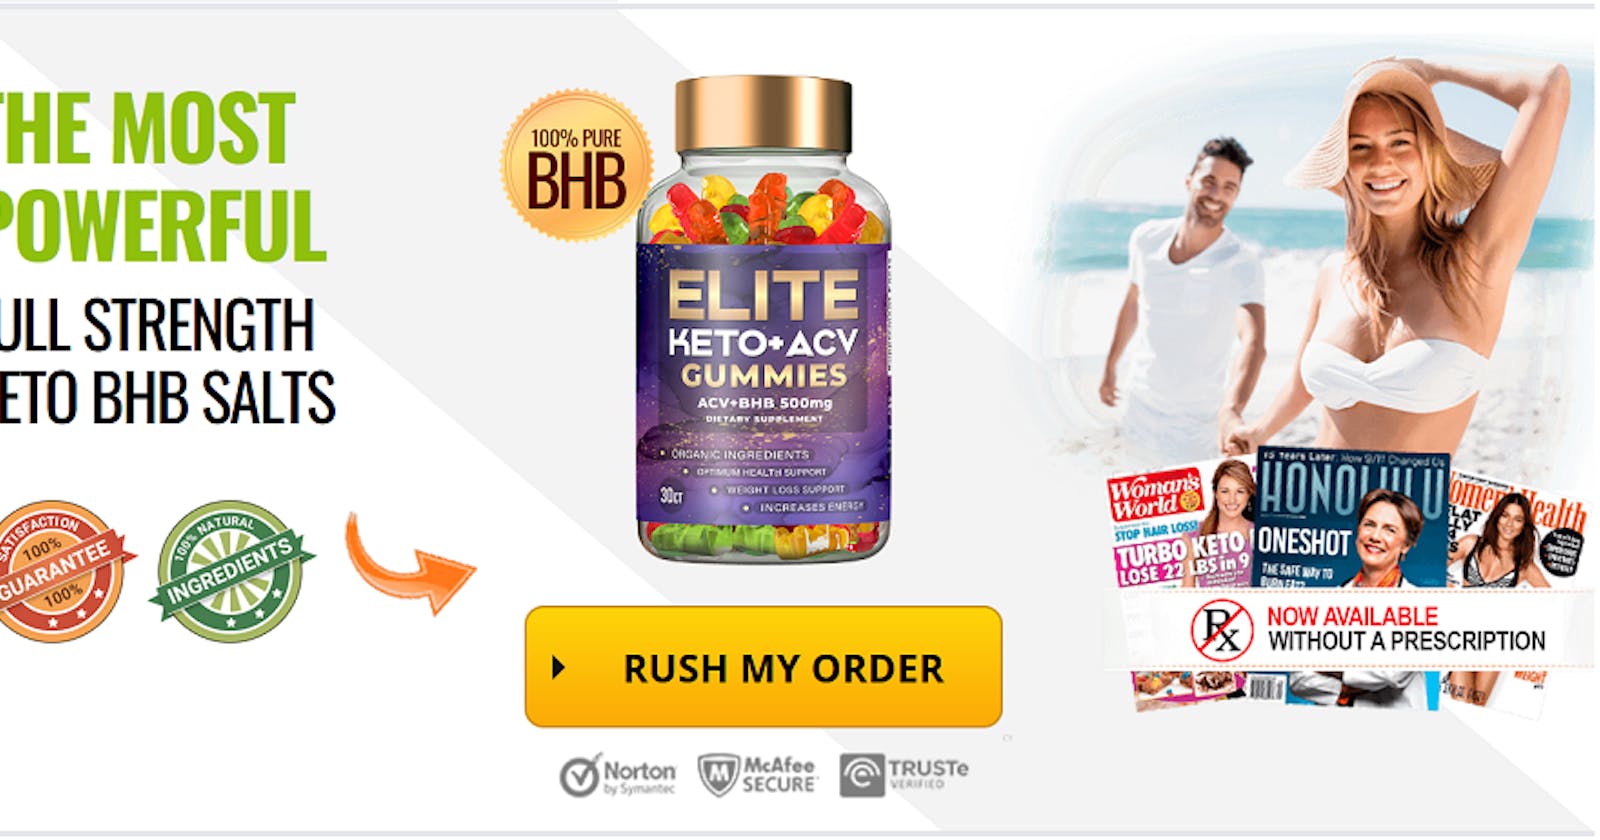 Elite Keto+ACV Gummies (No More Stored Fat) Does It Really Featured By Shark Tank USA?